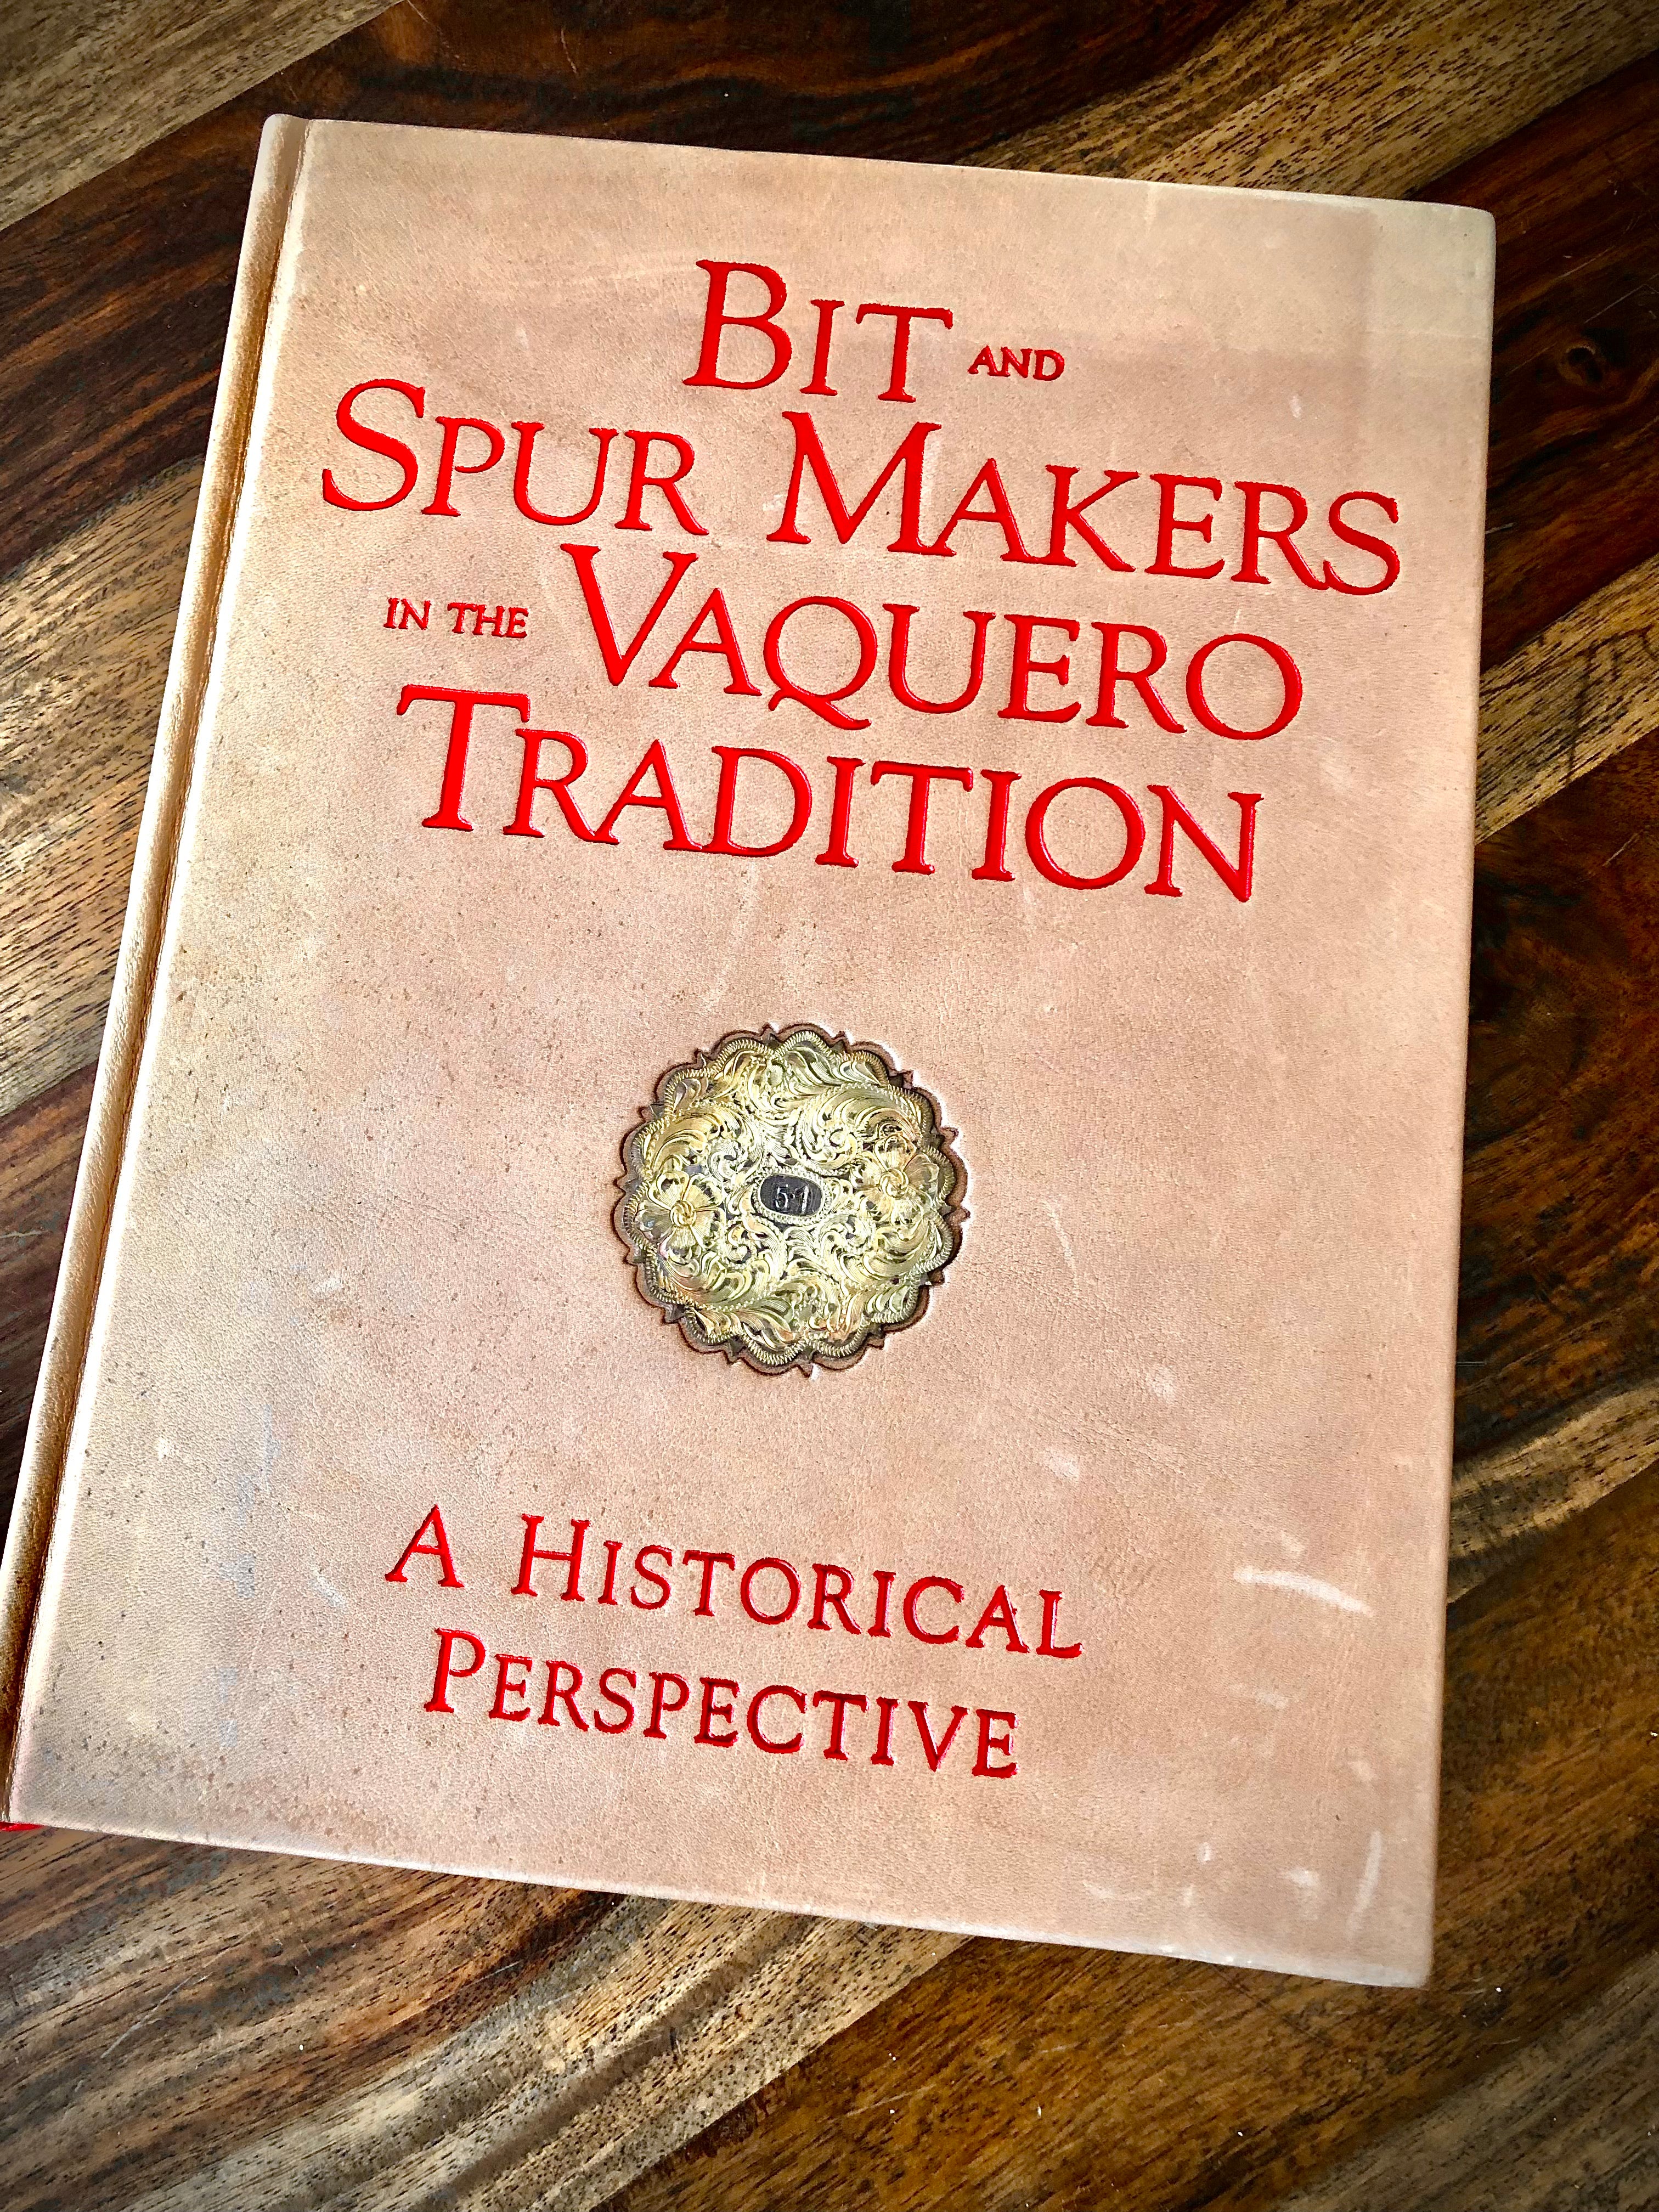 Limited Edition 51/250 Leather “Bit And Spur Makers In The Vaquero Tradition” by Ned and Jody Martin